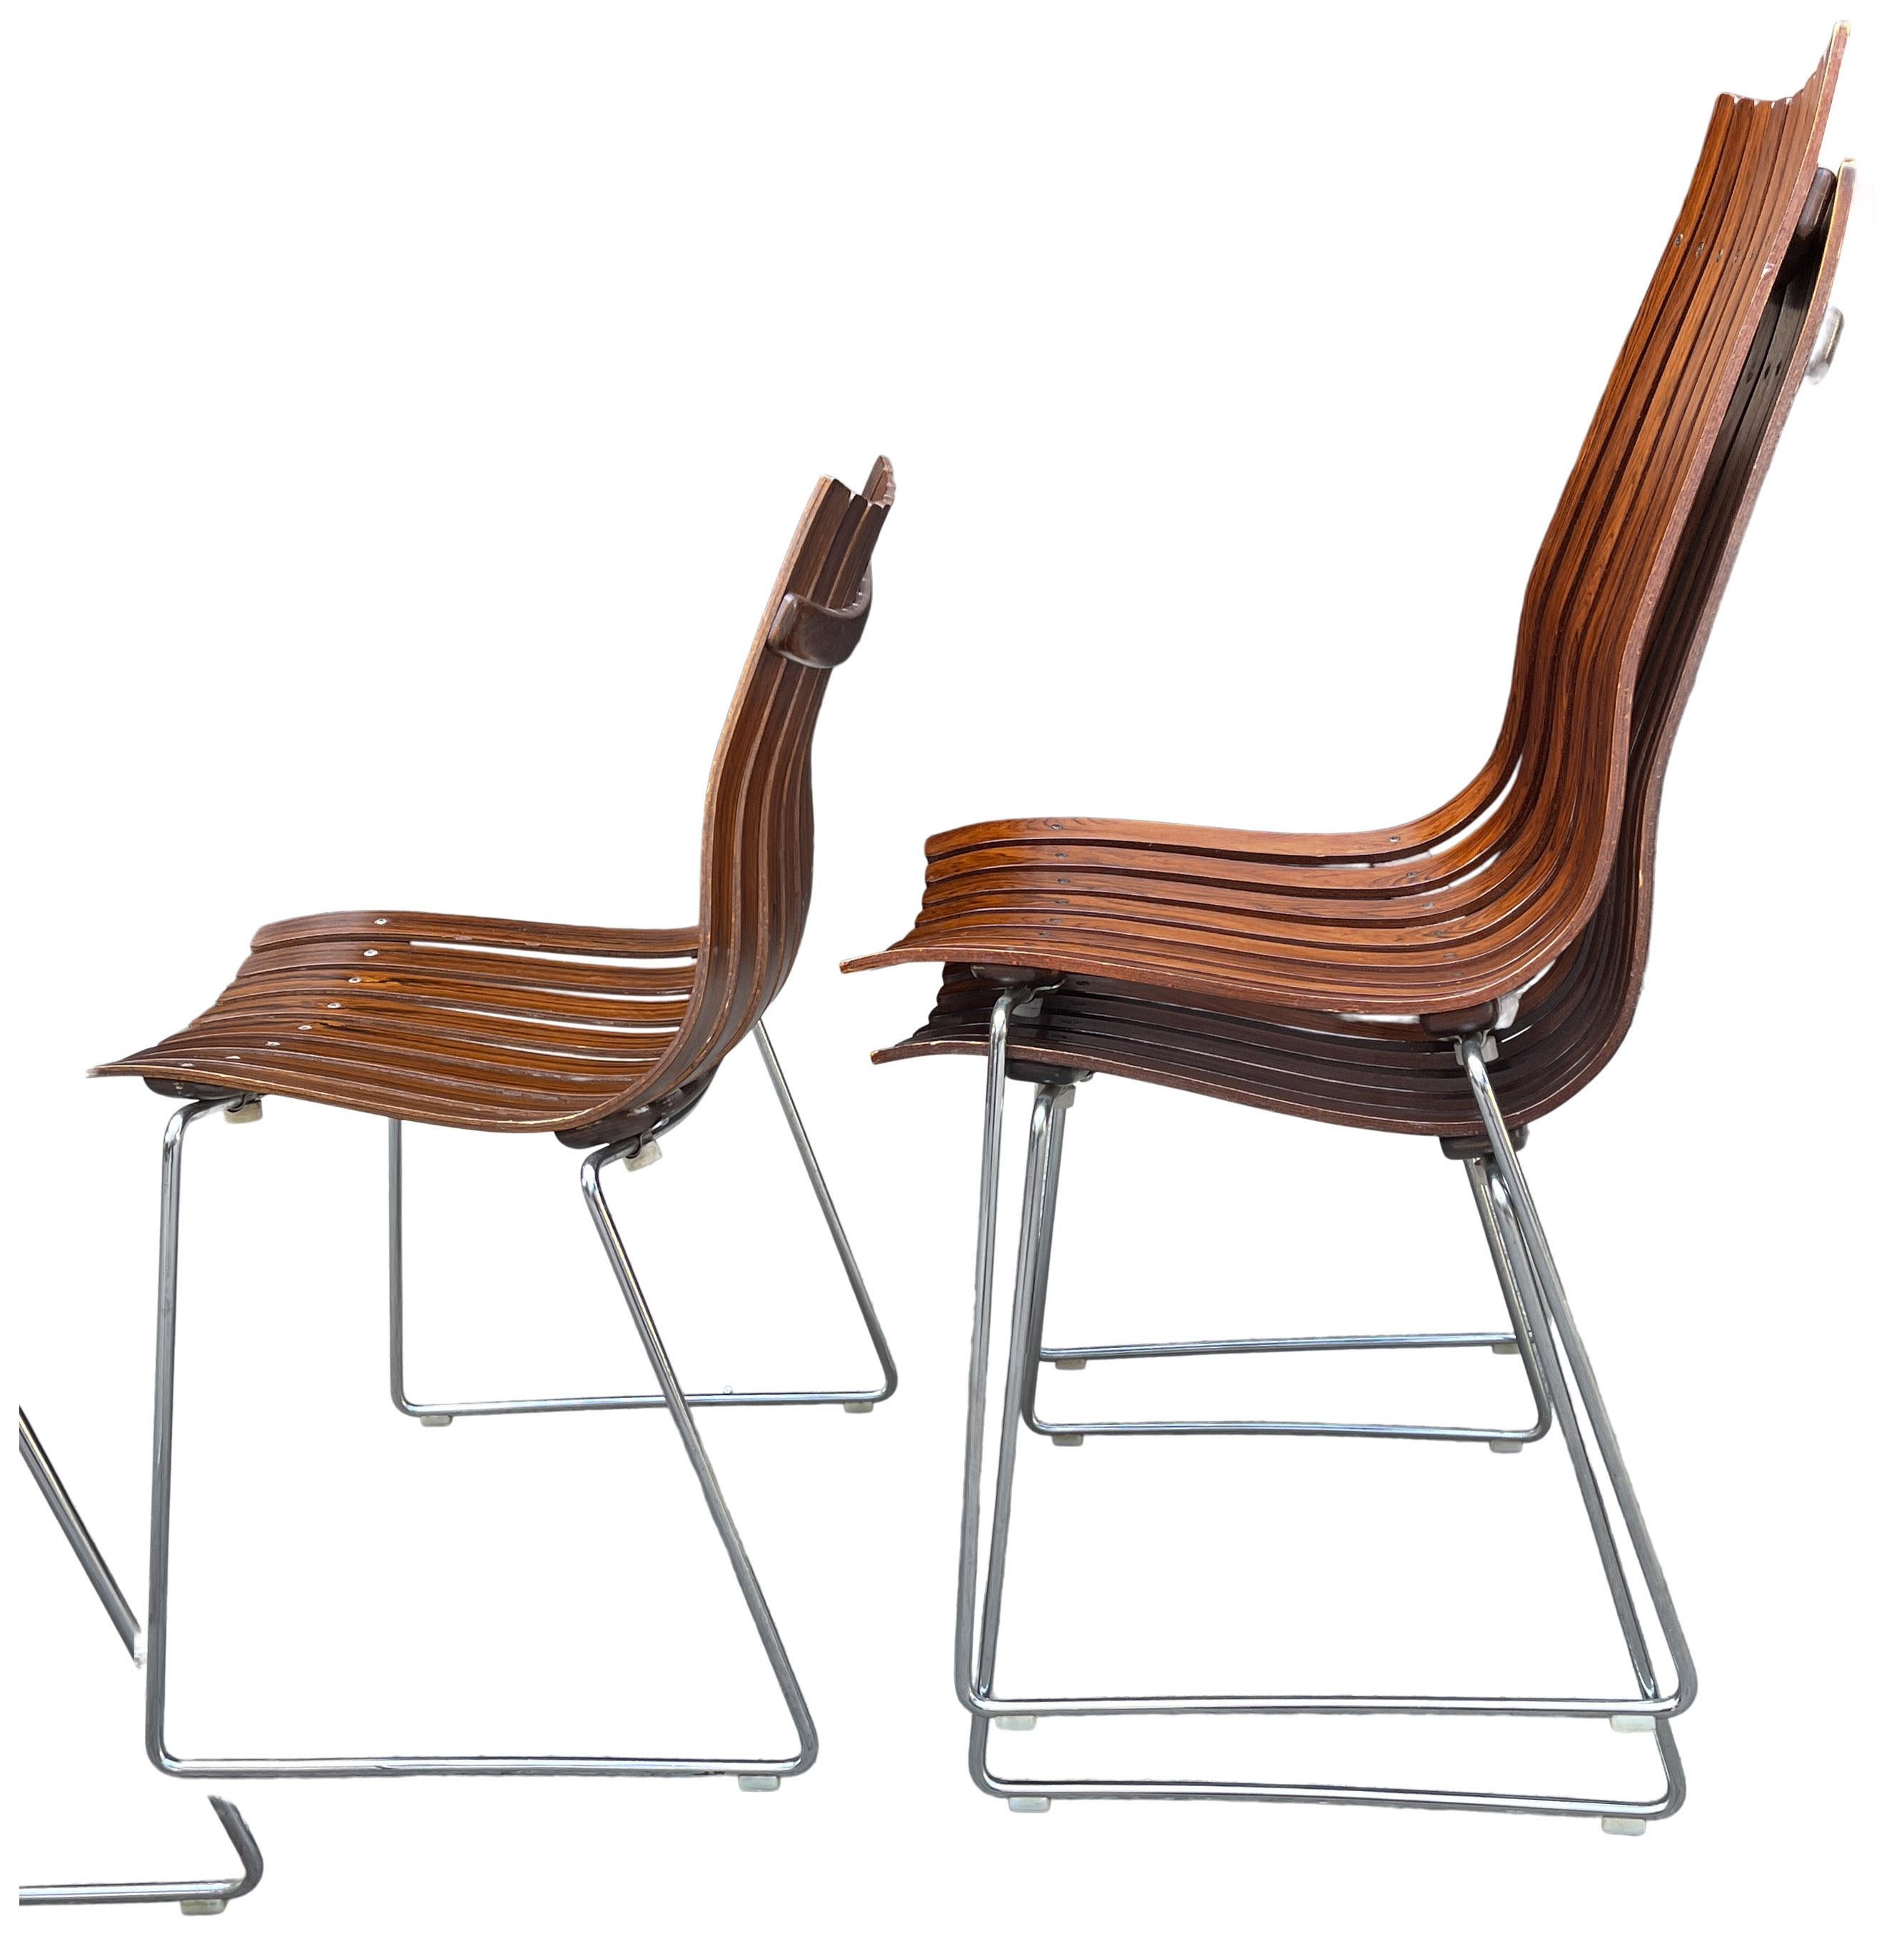 20th Century Midcentury Scandia Chairs by Hans Brattrud for Hove Mobler For Sale